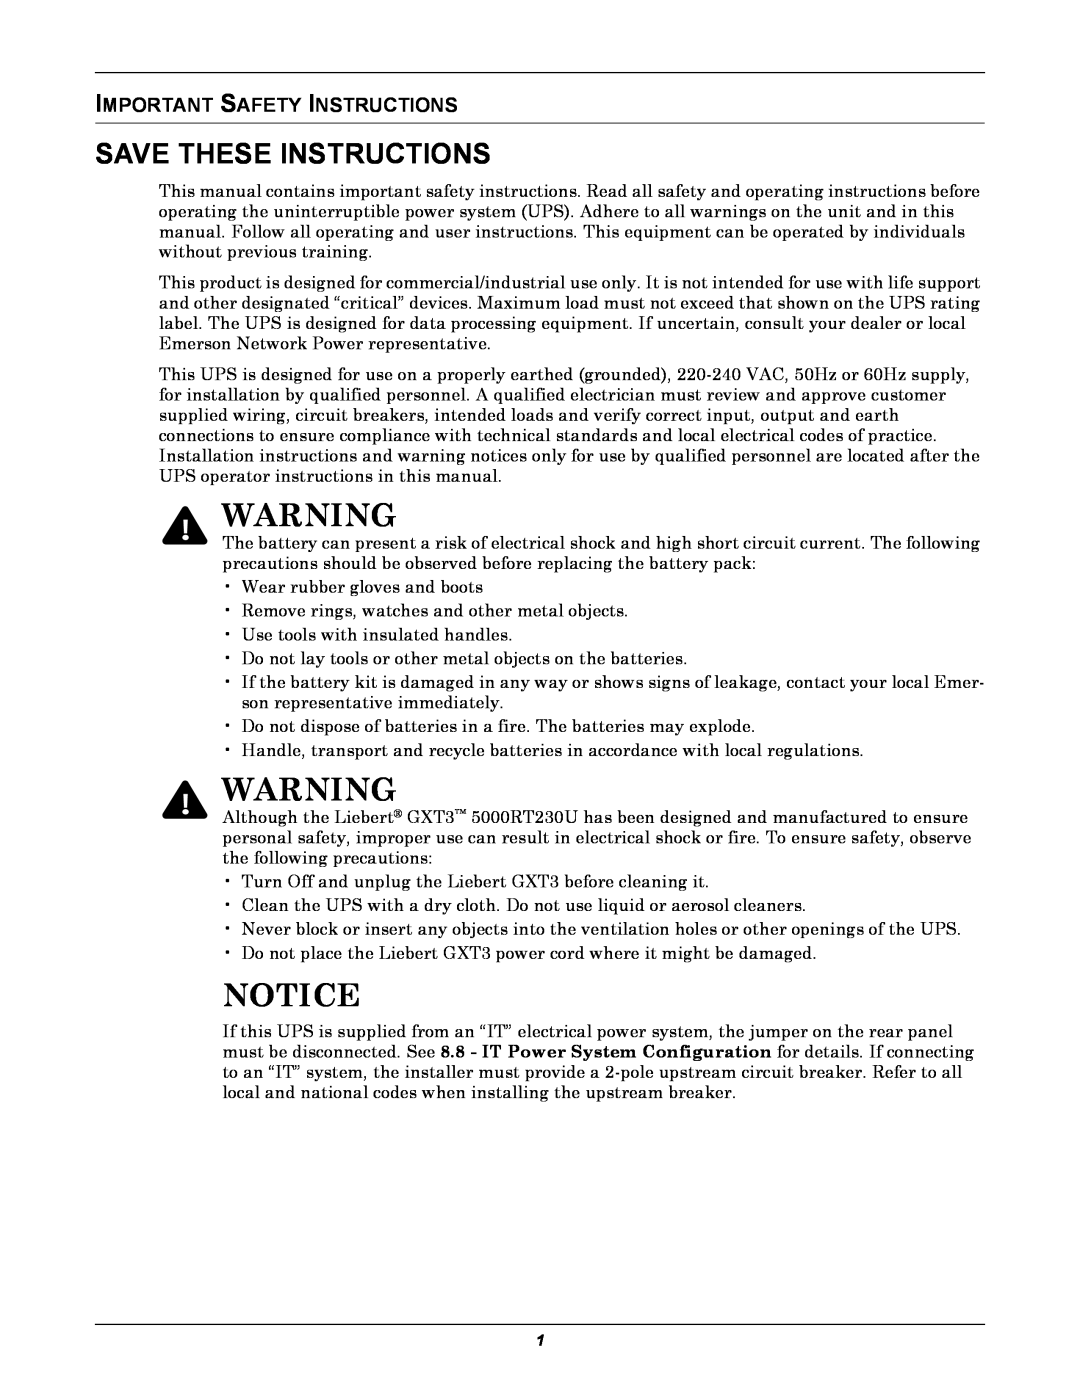 Emerson GXT3 230V user manual Notice, Save These Instructions, Important Safety Instructions 